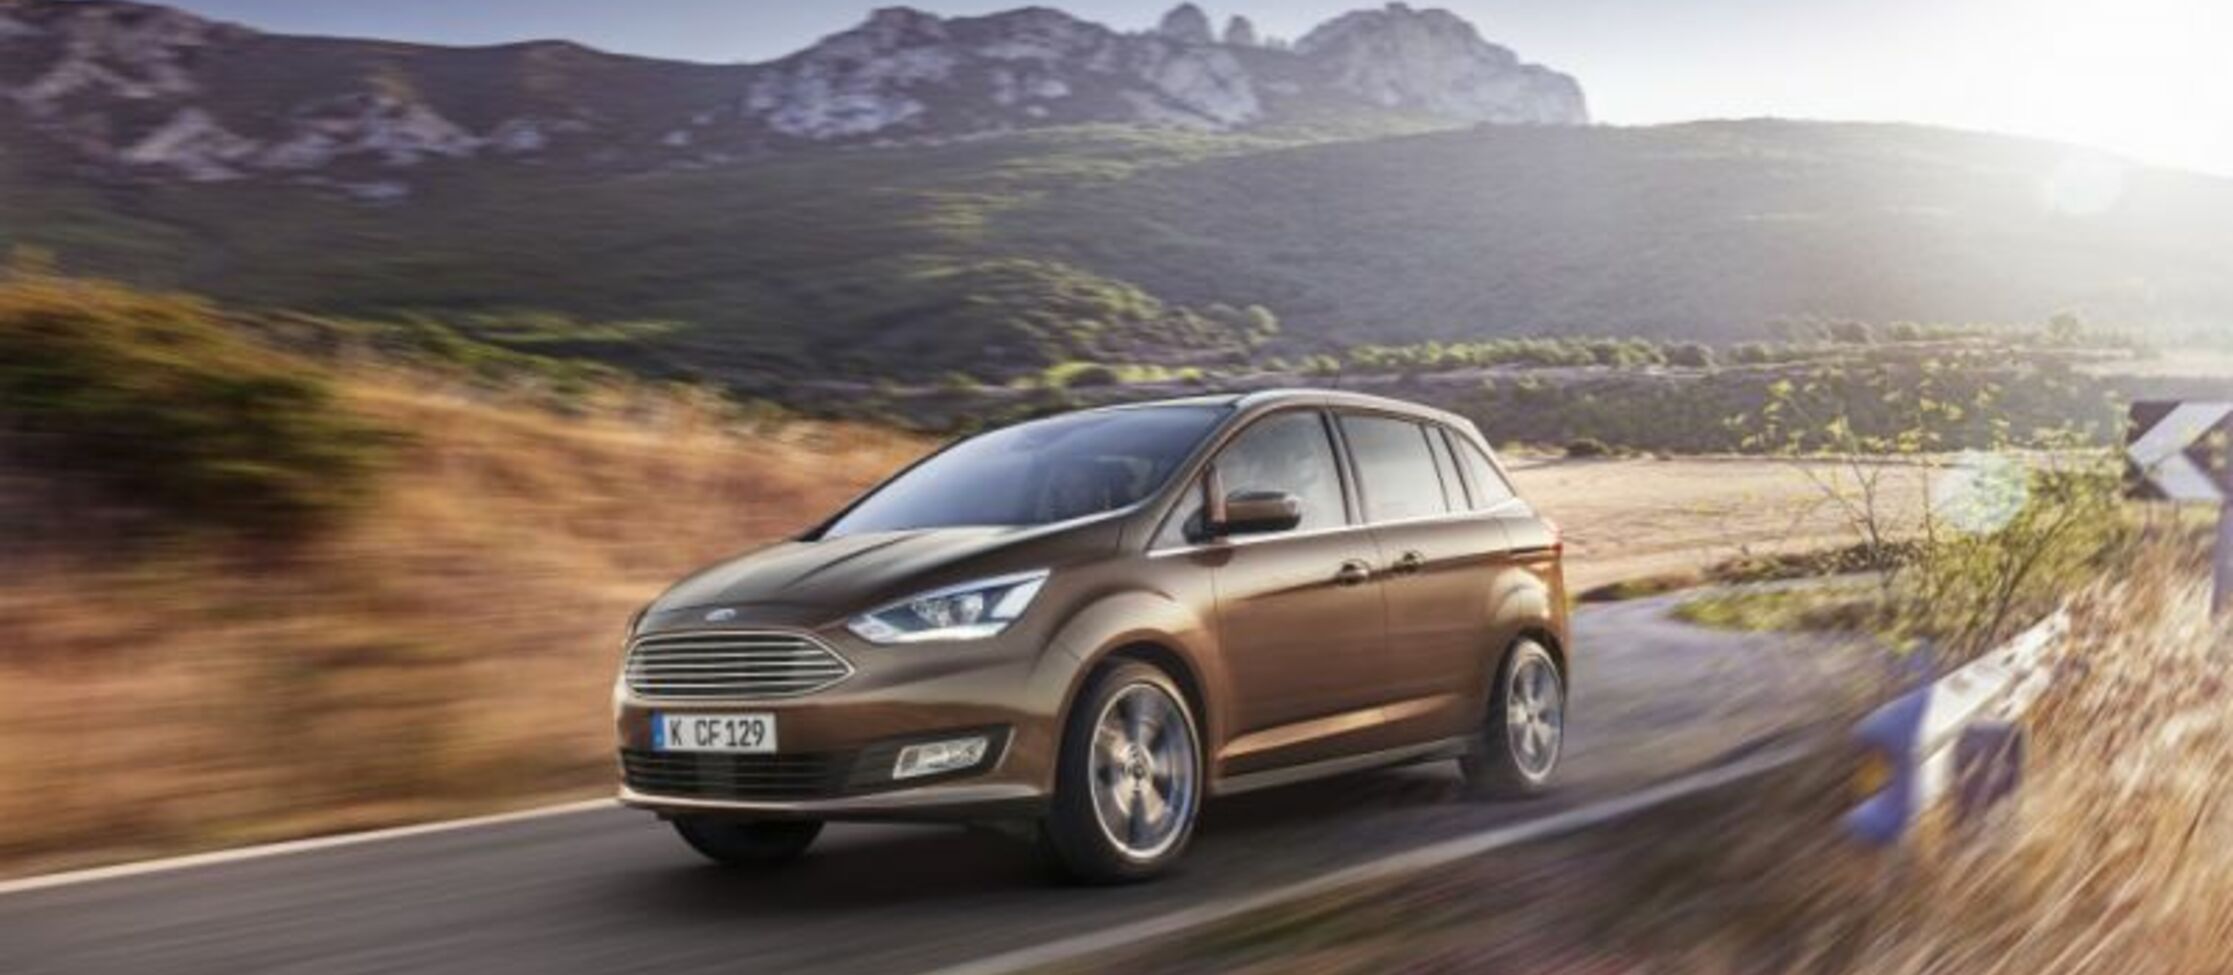 Ford Grand C-MAX (facelift 2015) 1.5 EcoBoost (150 Hp) PowerShift S&S 7 Seat 2015, 2016, 2017, 2018, 2019, 2020, 2021